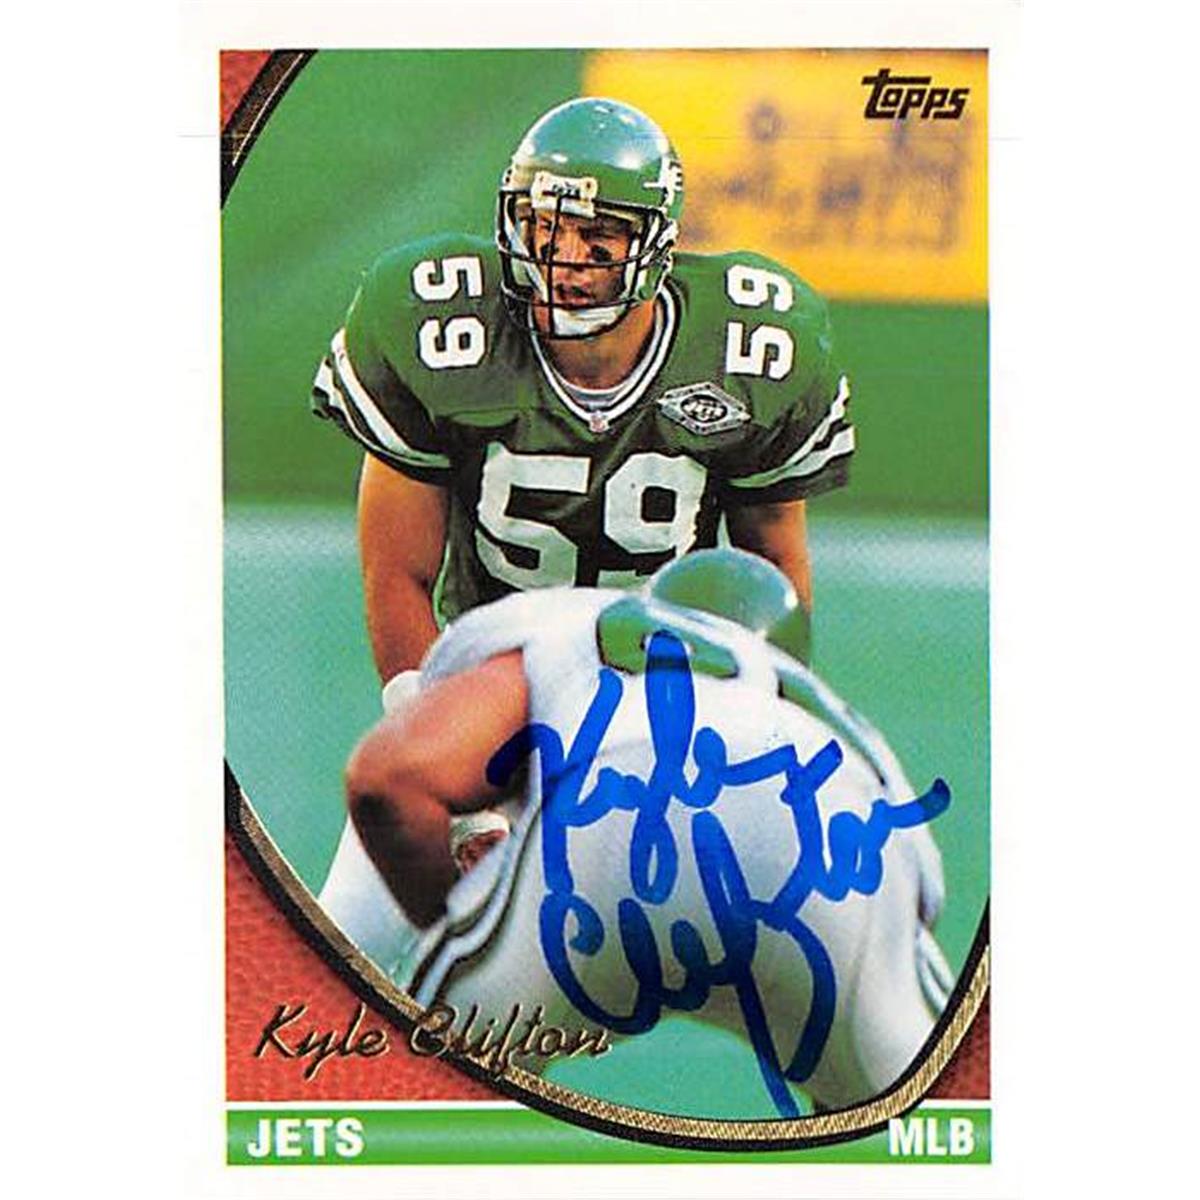 Picture of Autograph Warehouse 366635 Kyle Clifton Autographed Football Card - New York Jets 1994 Topps No.76